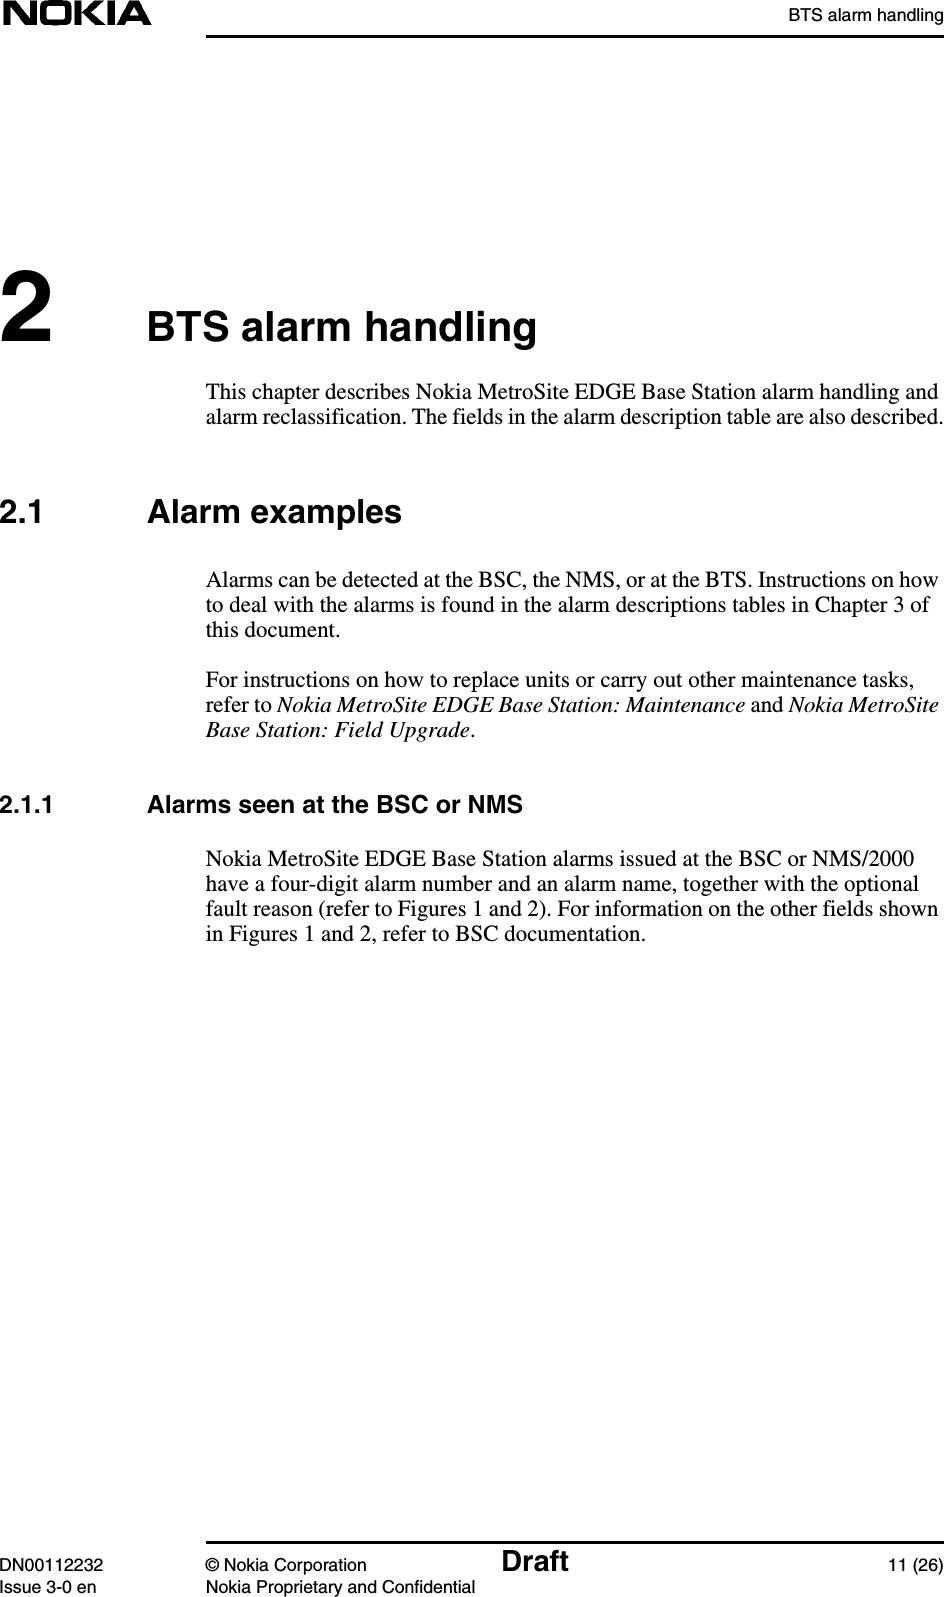 BTS alarm handlingDN00112232 © Nokia Corporation Draft 11 (26)Issue 3-0 en Nokia Proprietary and Confidential2BTS alarm handlingThis chapter describes Nokia MetroSite EDGE Base Station alarm handling andalarm reclassification. The fields in the alarm description table are also described.2.1 Alarm examplesAlarms can be detected at the BSC, the NMS, or at the BTS. Instructions on howto deal with the alarms is found in the alarm descriptions tables in Chapter 3 ofthis document.For instructions on how to replace units or carry out other maintenance tasks,refer to Nokia MetroSite EDGE Base Station: Maintenance and Nokia MetroSiteBase Station: Field Upgrade.2.1.1 Alarms seen at the BSC or NMSNokia MetroSite EDGE Base Station alarms issued at the BSC or NMS/2000have a four-digit alarm number and an alarm name, together with the optionalfault reason (refer to Figures 1 and 2). For information on the other fields shownin Figures 1 and 2, refer to BSC documentation.